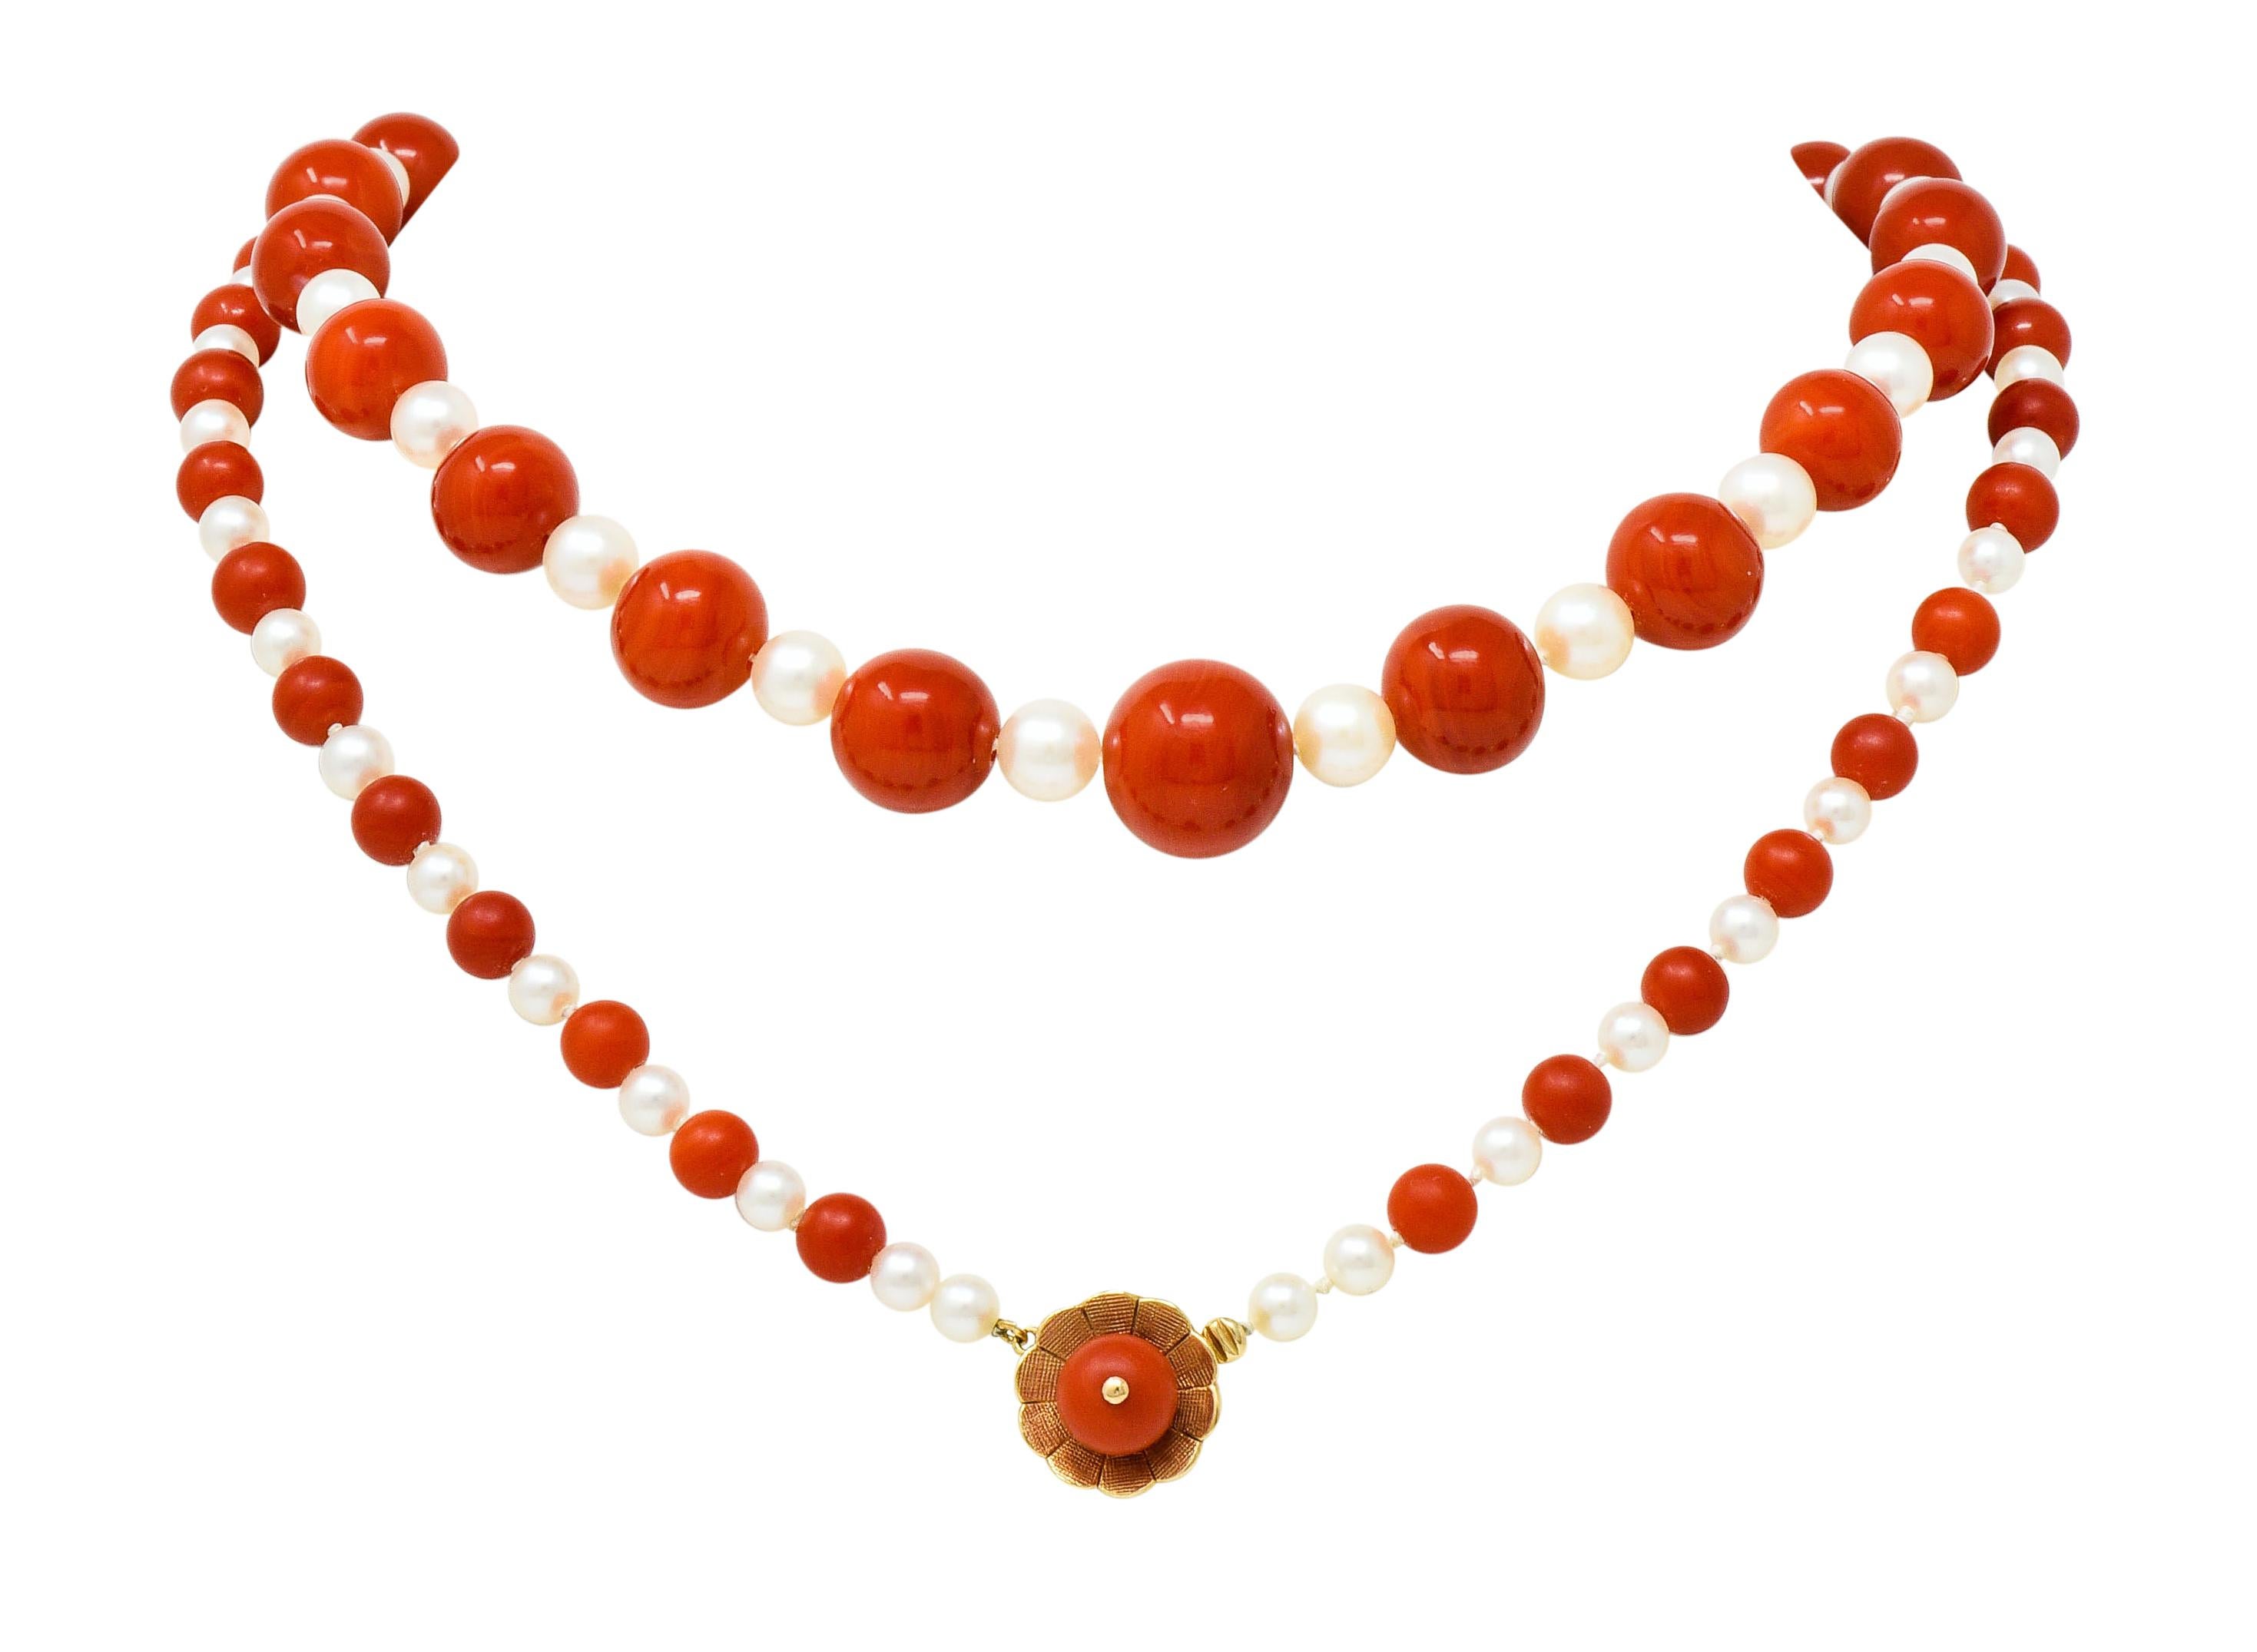 Strand necklace is hand-knotted with coral beads alternating with cultured pearls; graduating in size

Coral measures 13.4 to 6.1 mm and are very well-matched with evenly distributed orangey-red color

Cultured pearls measure 6.8 to 4.6 mm and are